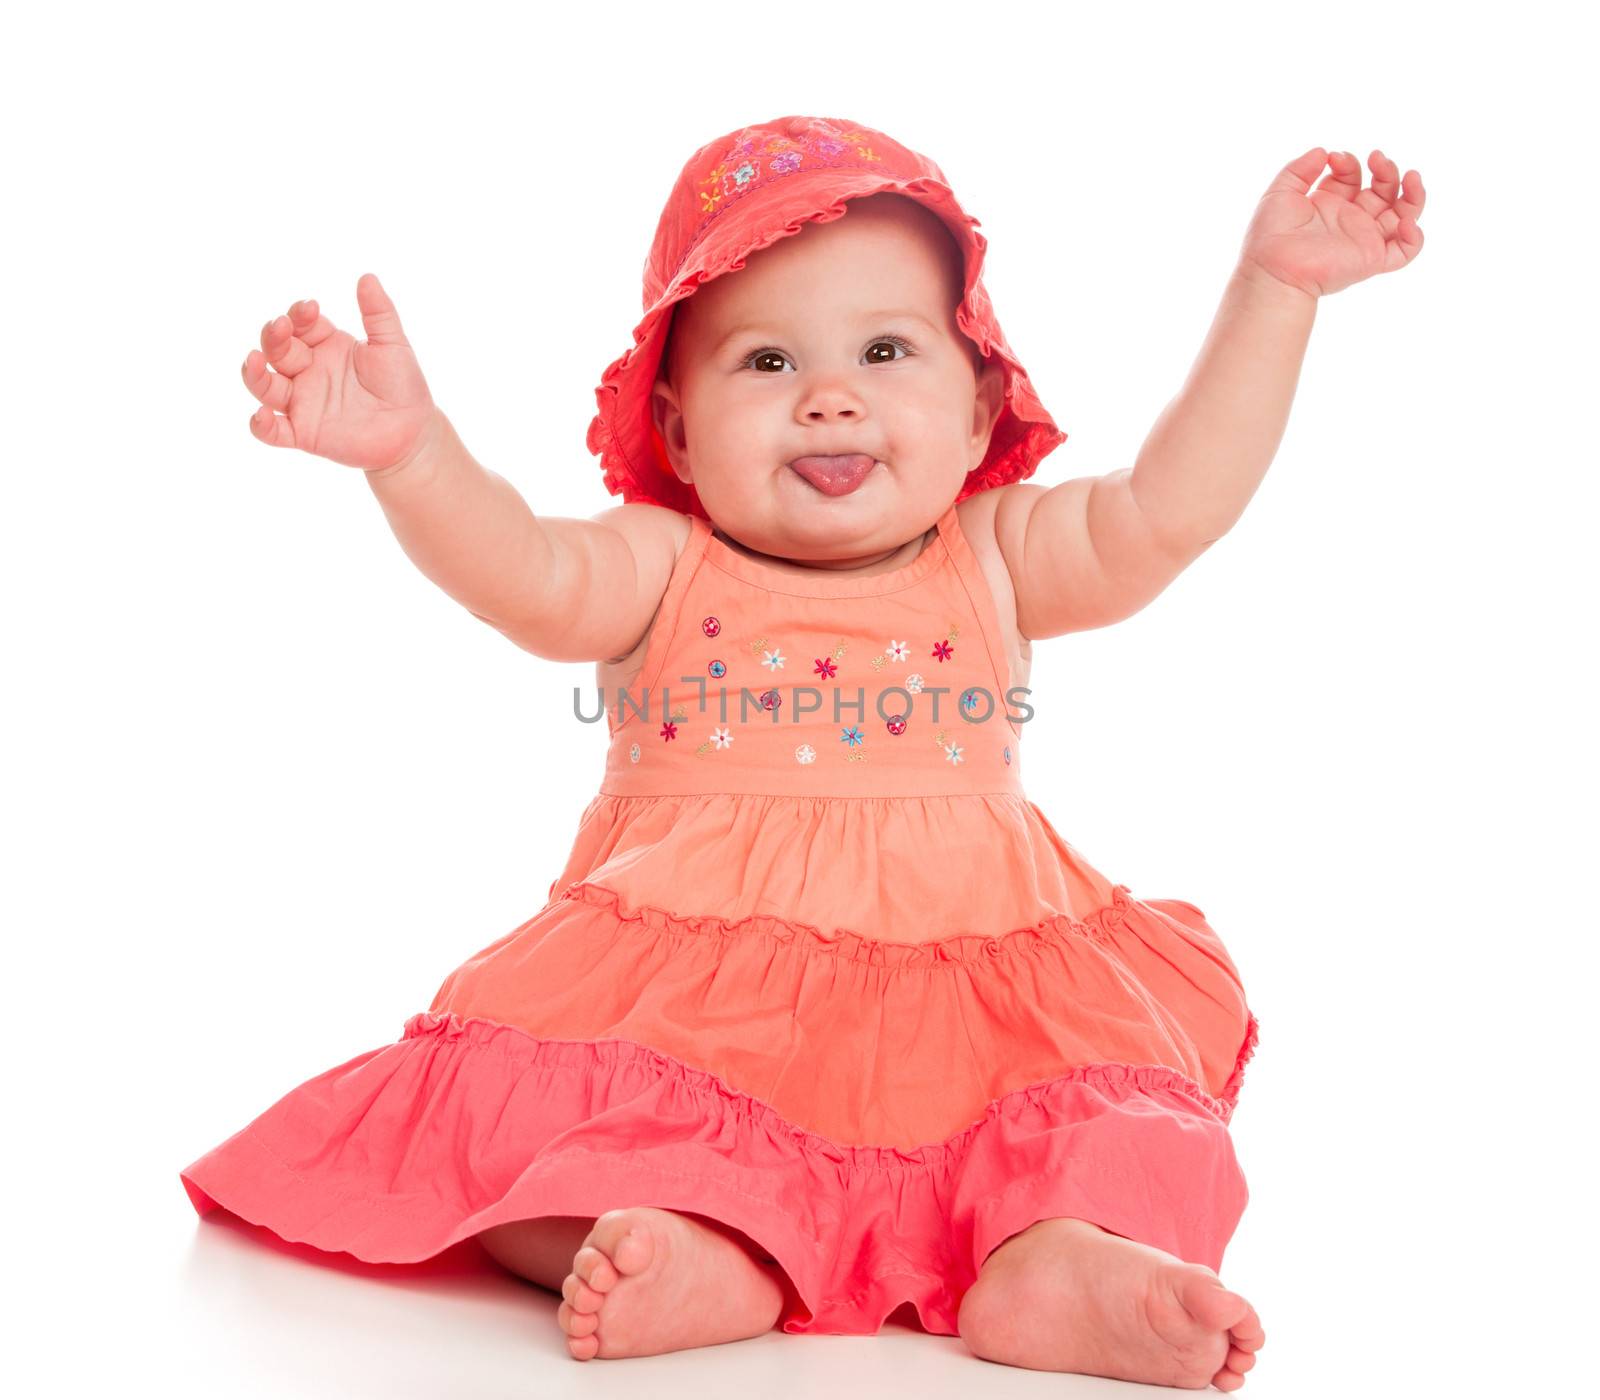 Beautiful baby girl sitting in a pink dress and hat. Isolated on white